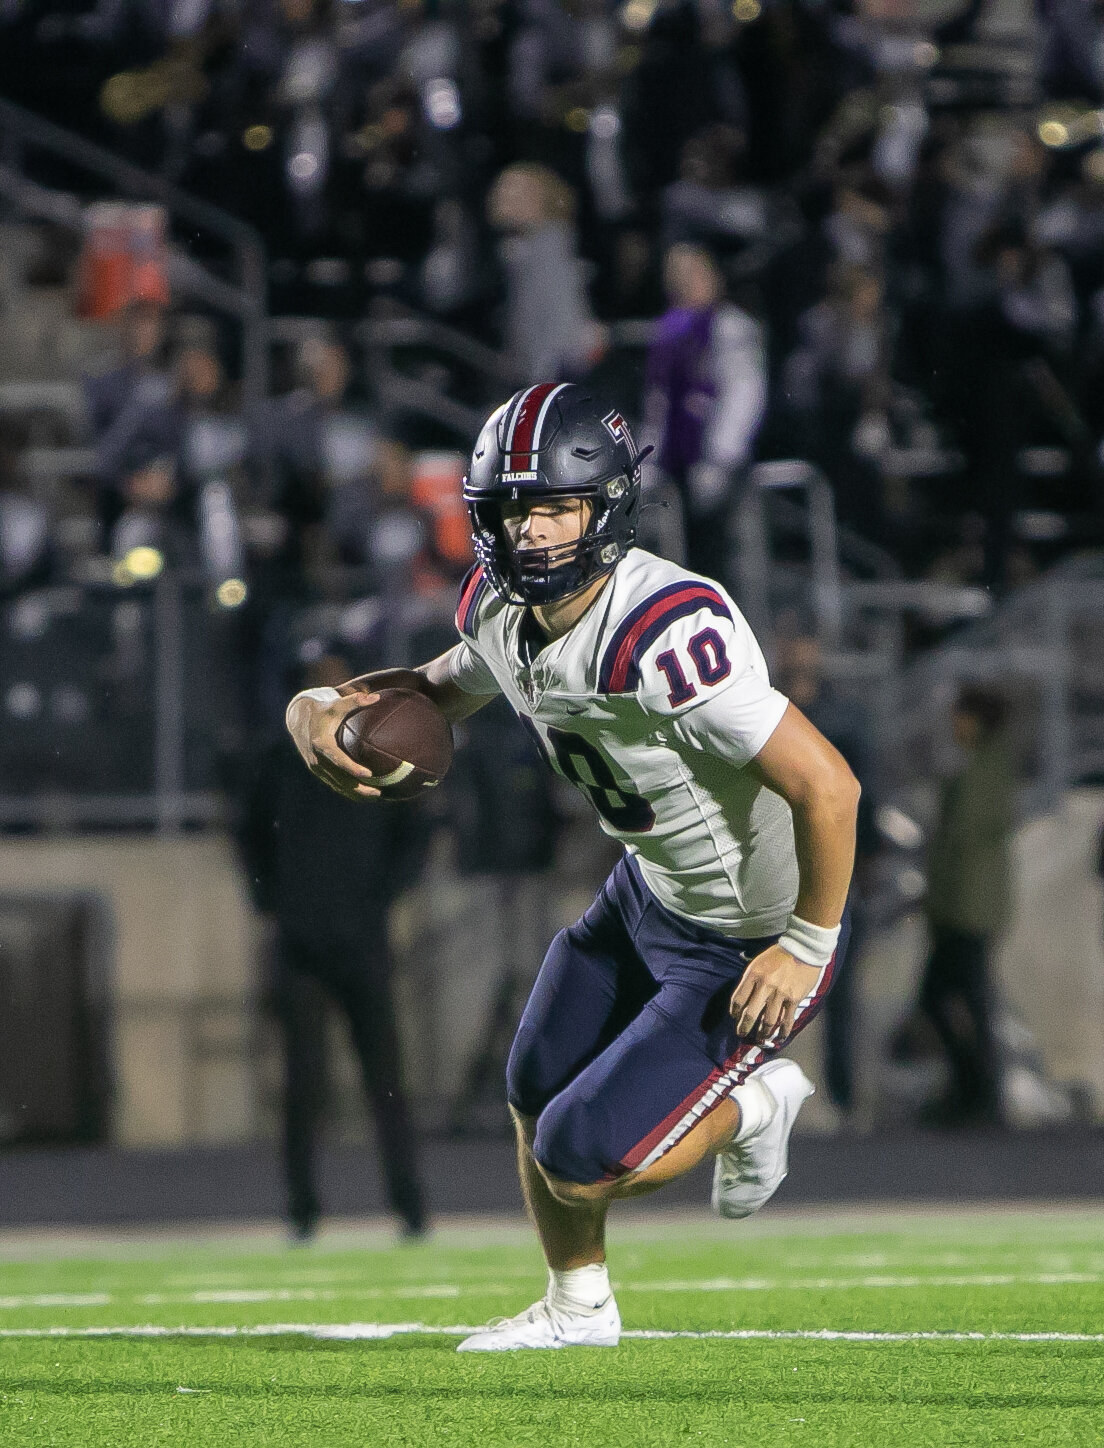 Wyatt Young turns upfield during Friday's game between Tompkins and Ridge Point at Hall Stadium.